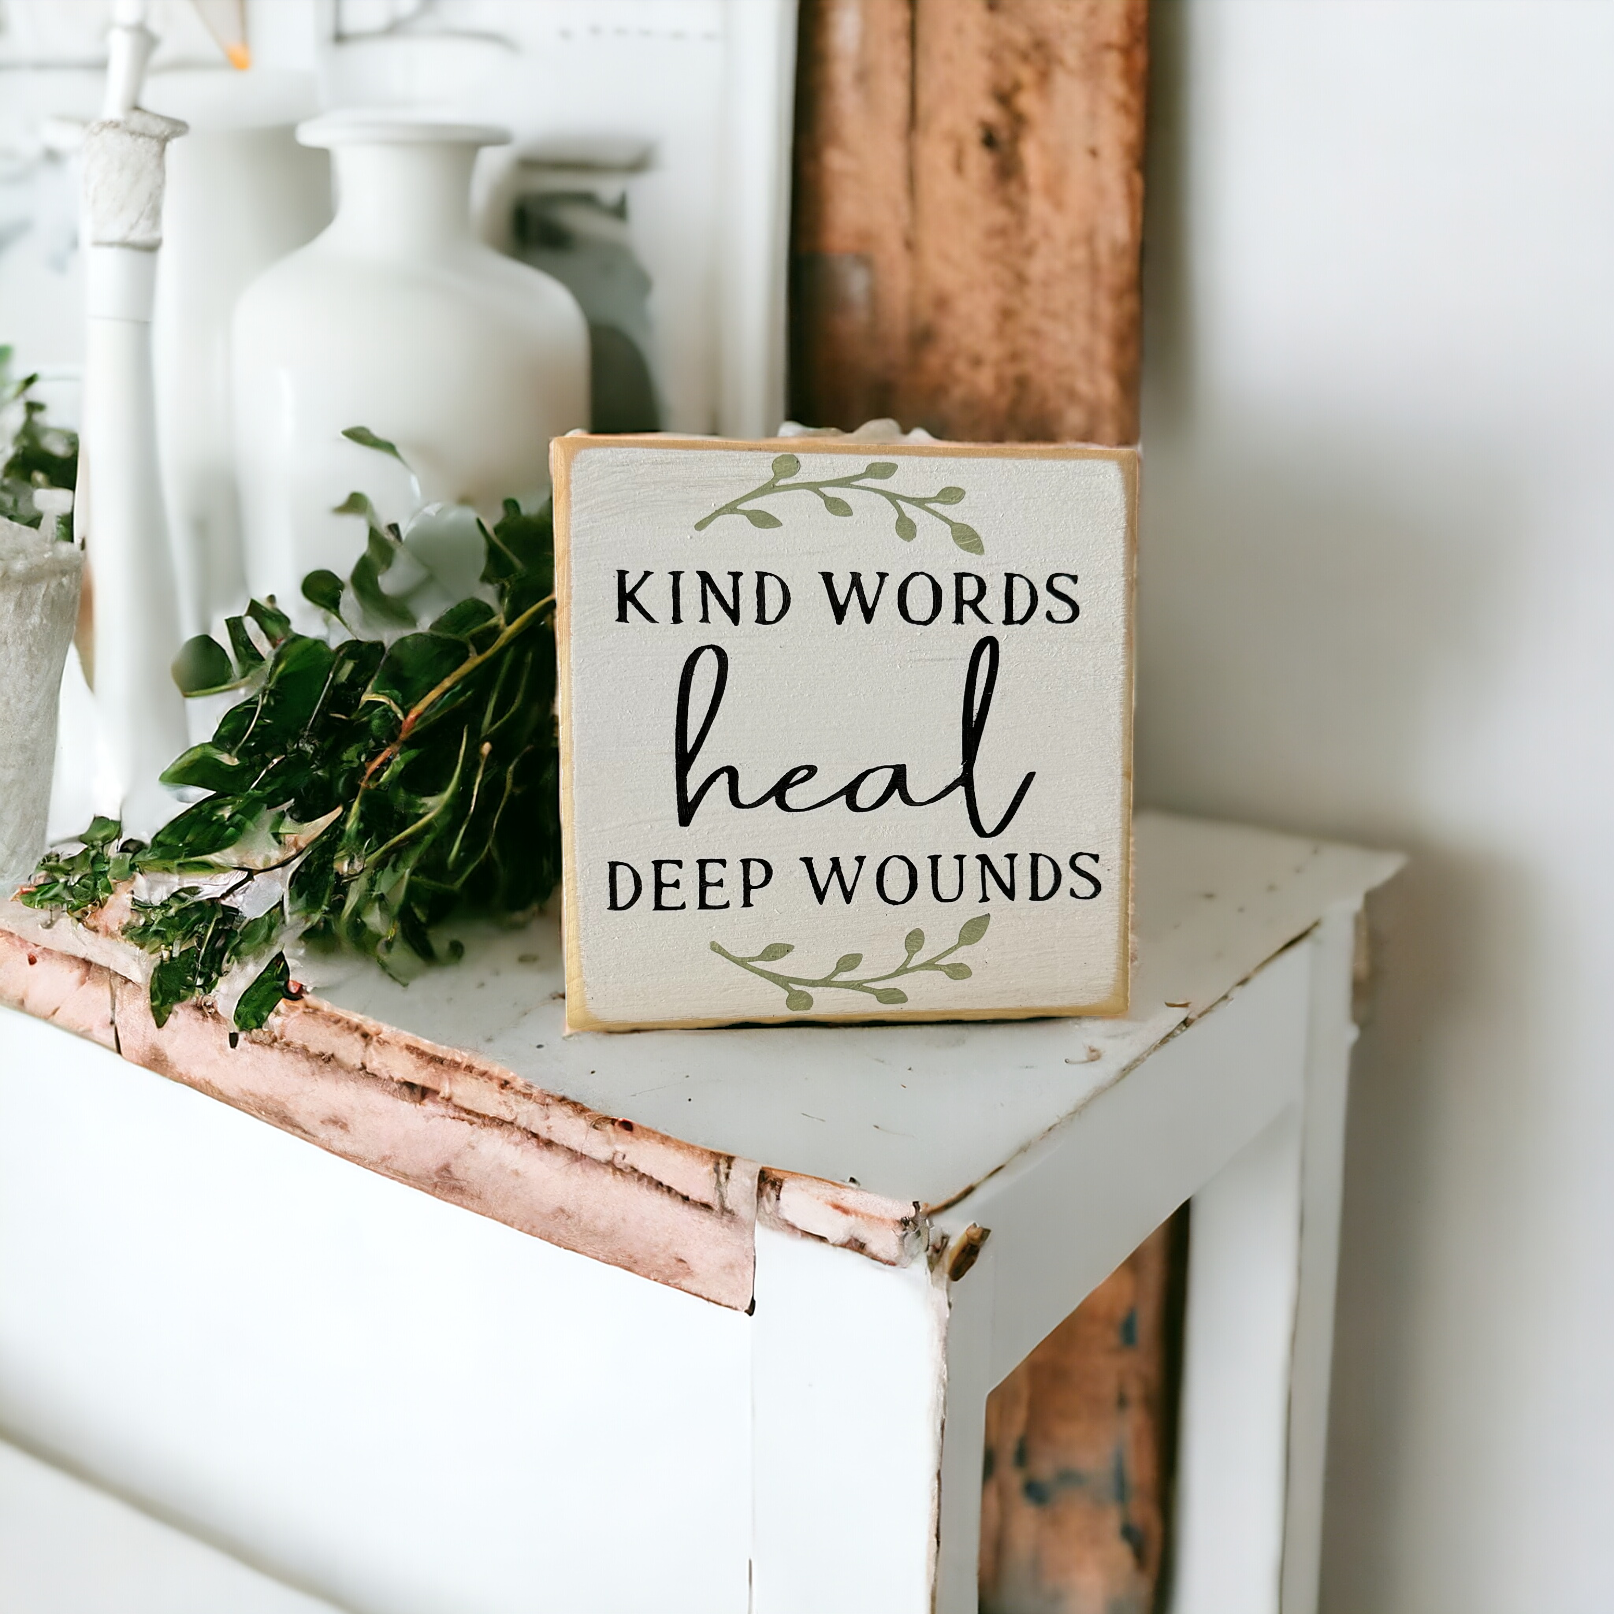 4.5" x 4.5" inspirational wood block sign with rustic black farmhouse text 'Kind words heal deep wounds' on a serene white background adorned with sage green botanical vines.